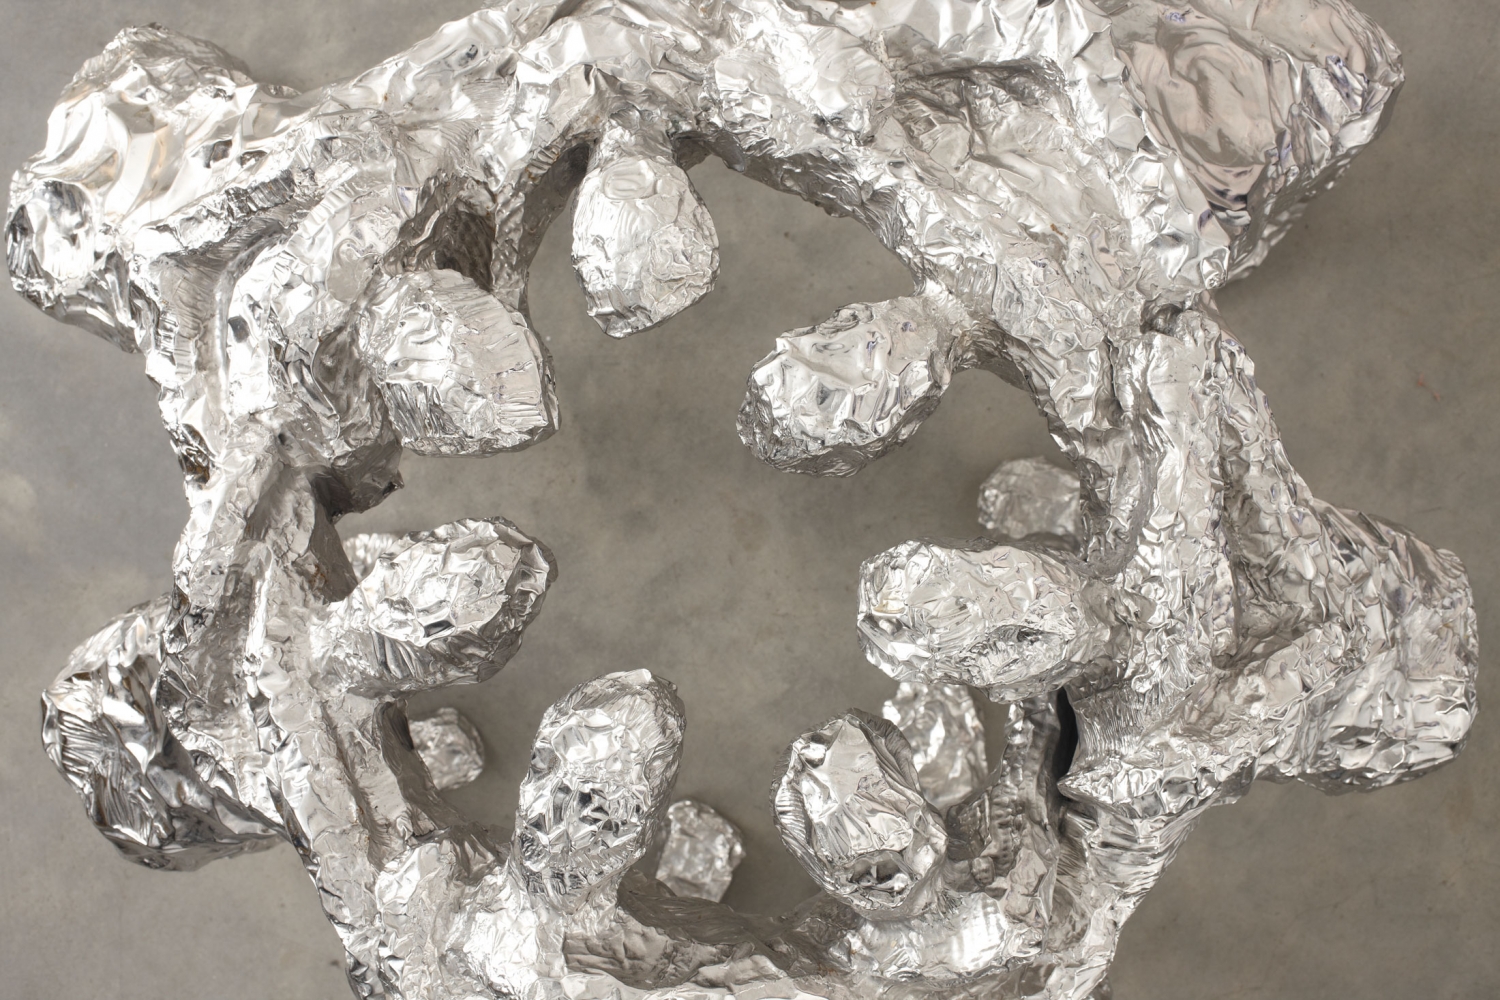 Tom Friedman
Huddle, 2013

Detail
Stainless steel
34 x 35 x 35 inches
(86.36 x 88.9 x 88.9 cm)